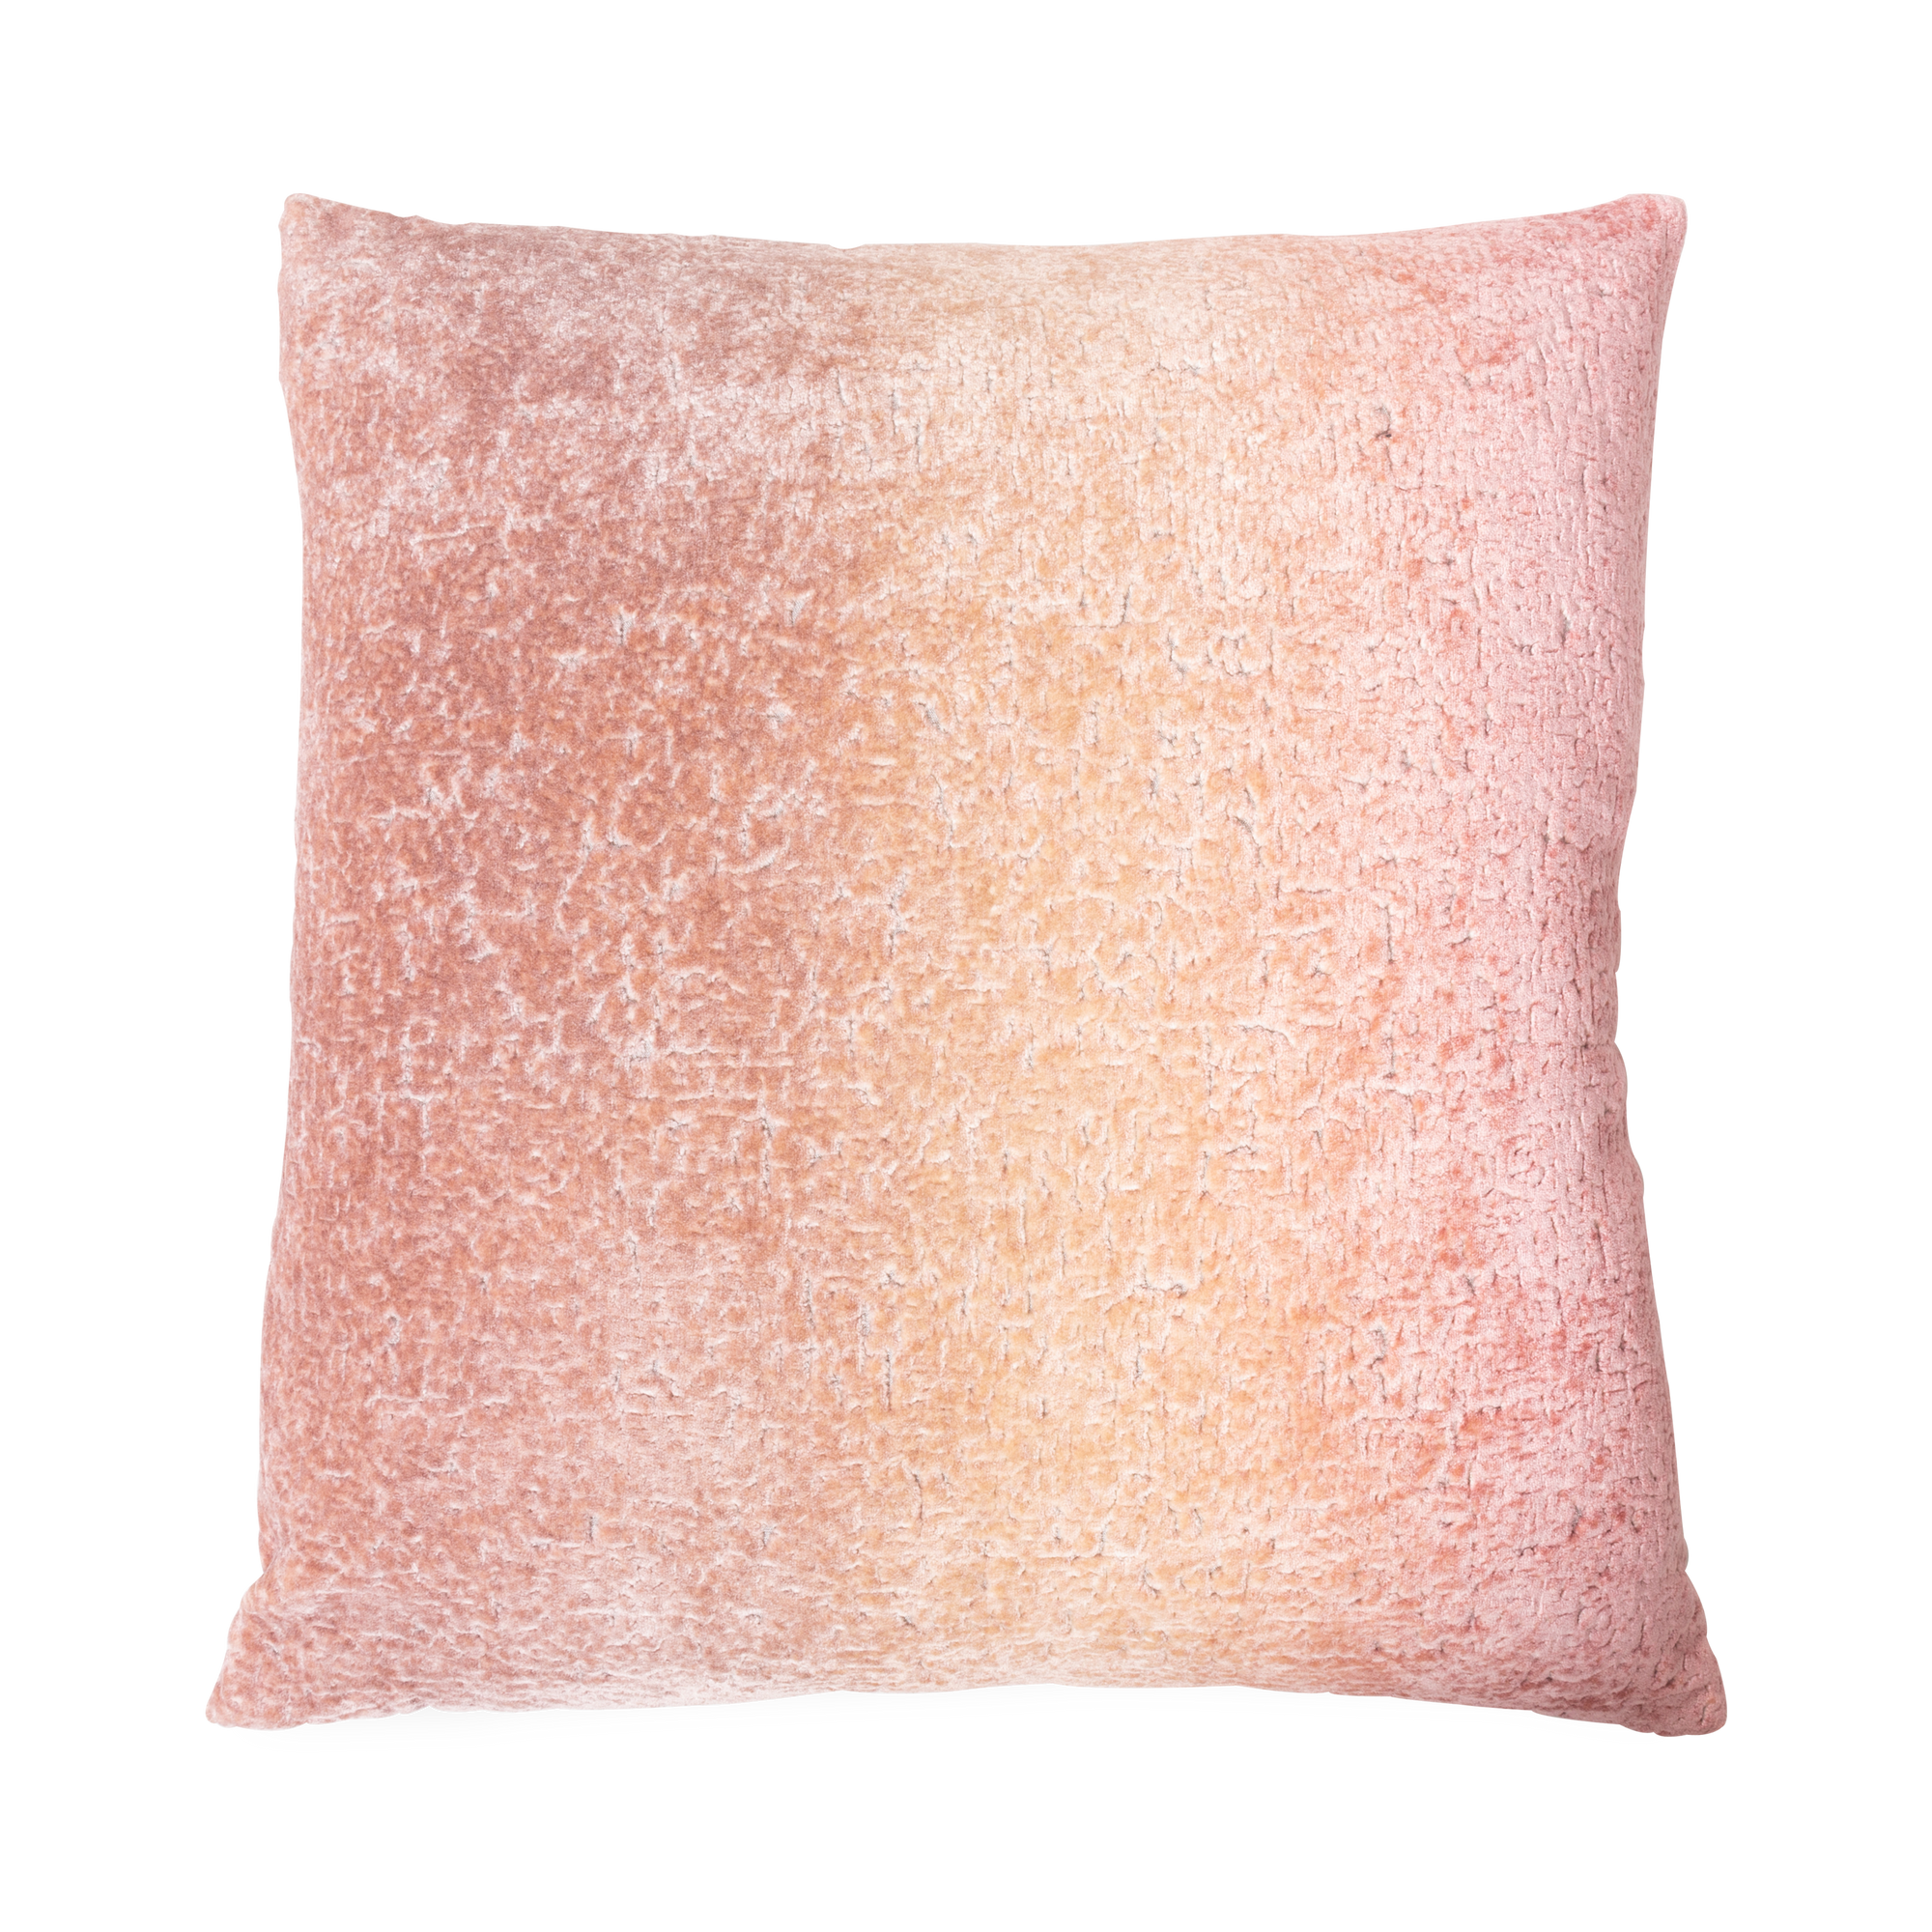 Made with high, soft pile, the Coral Pillow provides an incredibly plush velvet front fabric that will bring comfort to any sofa or bed.